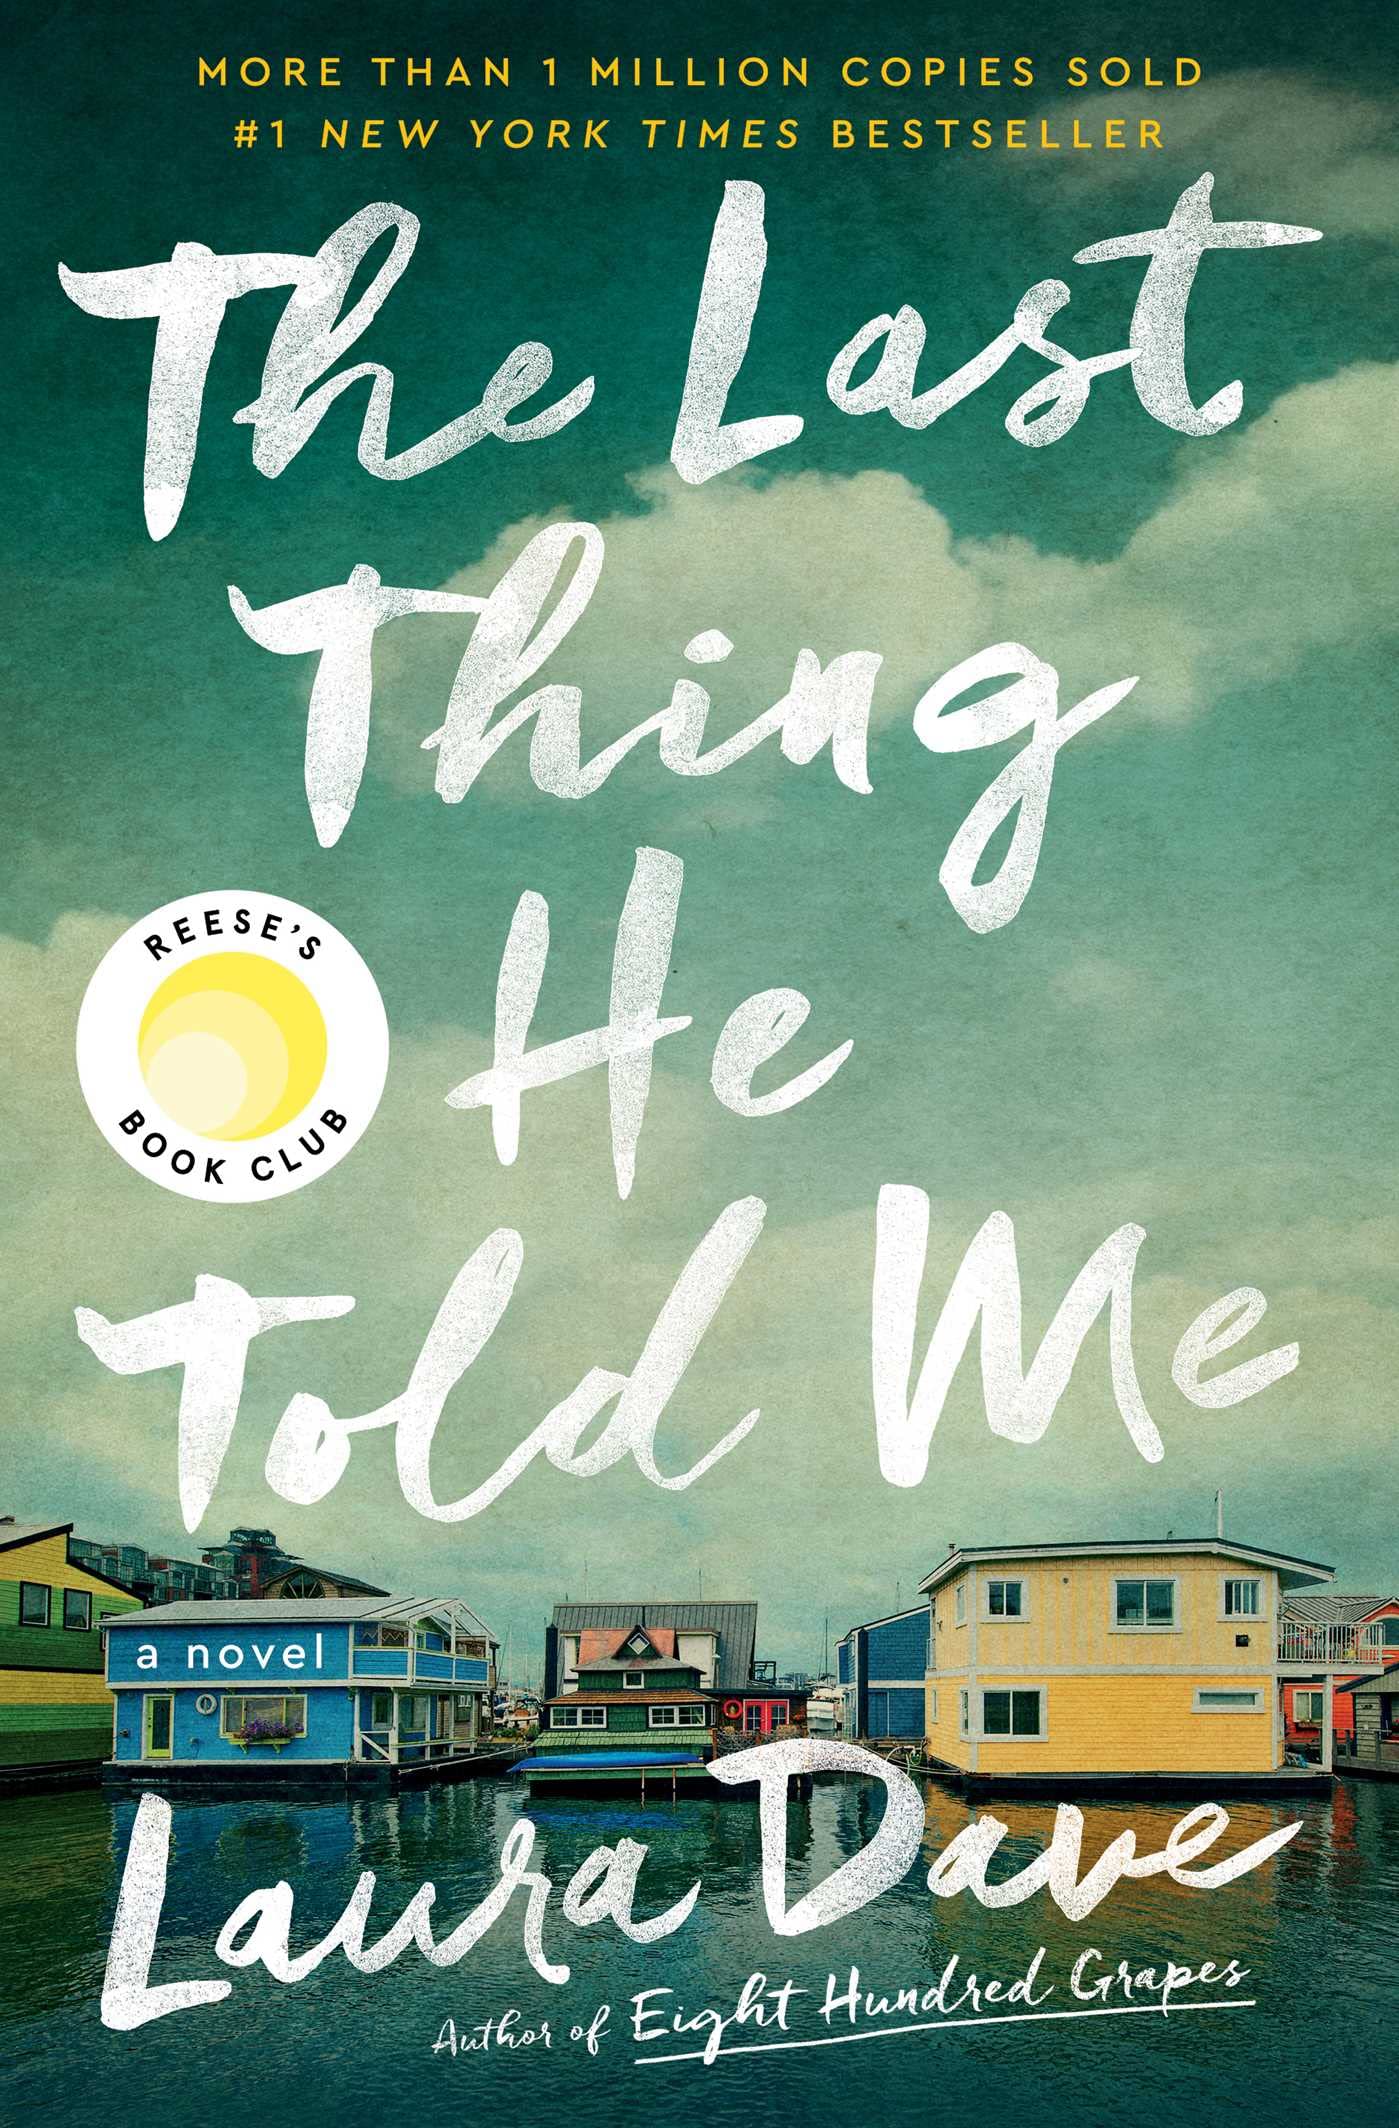 Image for "The Last Thing He Told Me"